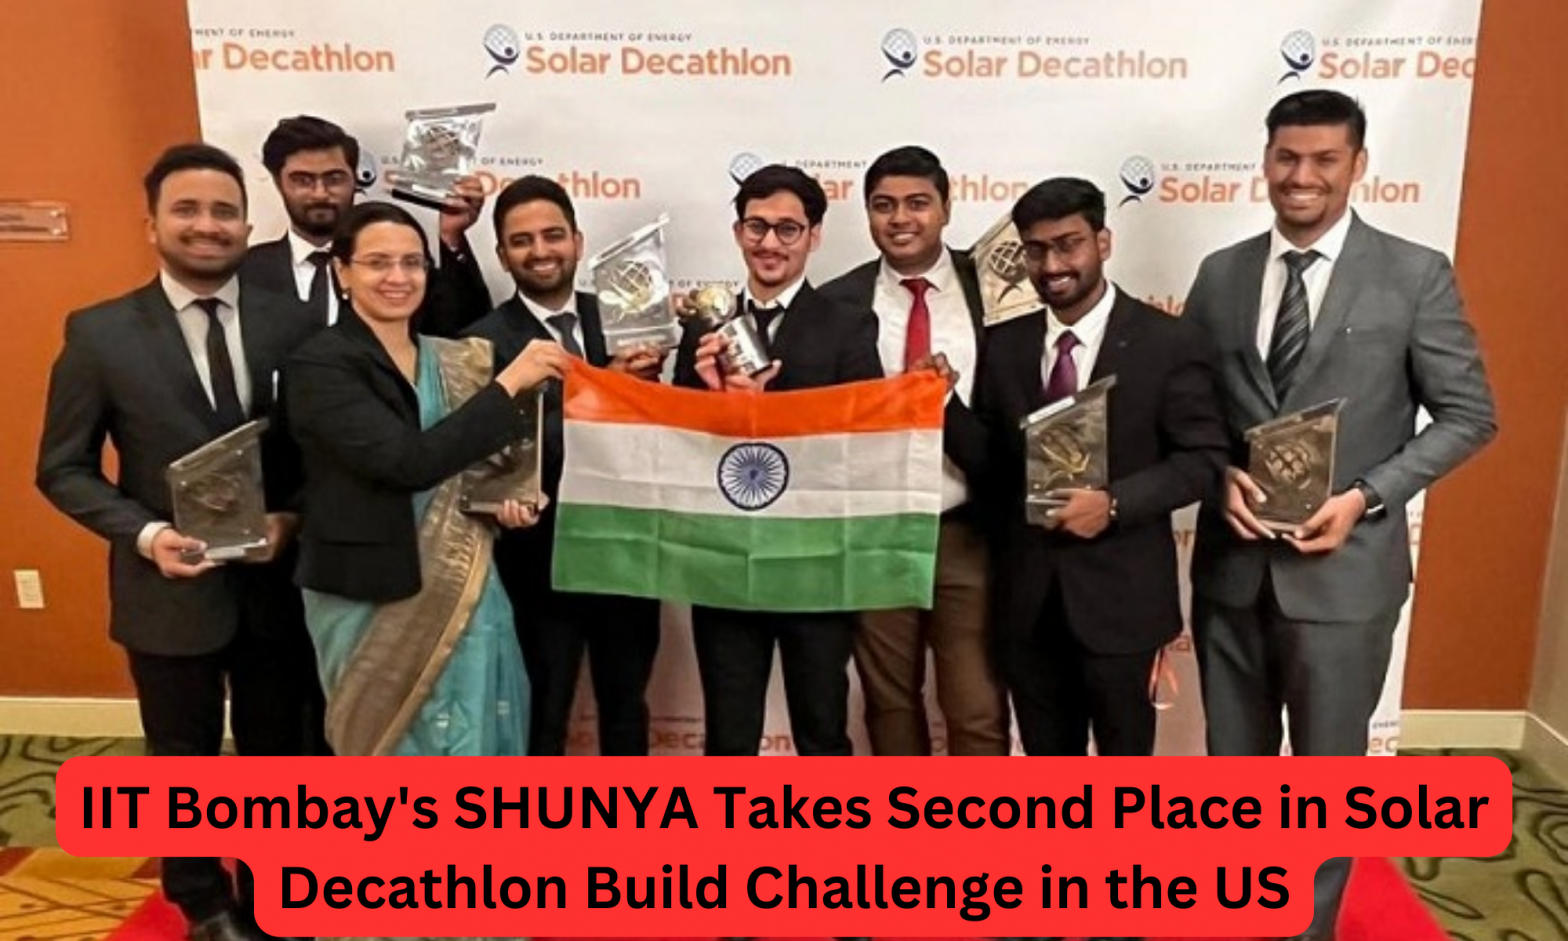 IT Bombay's SHUNYA Takes Second Place in Solar Decathlon Build Challenge in the US